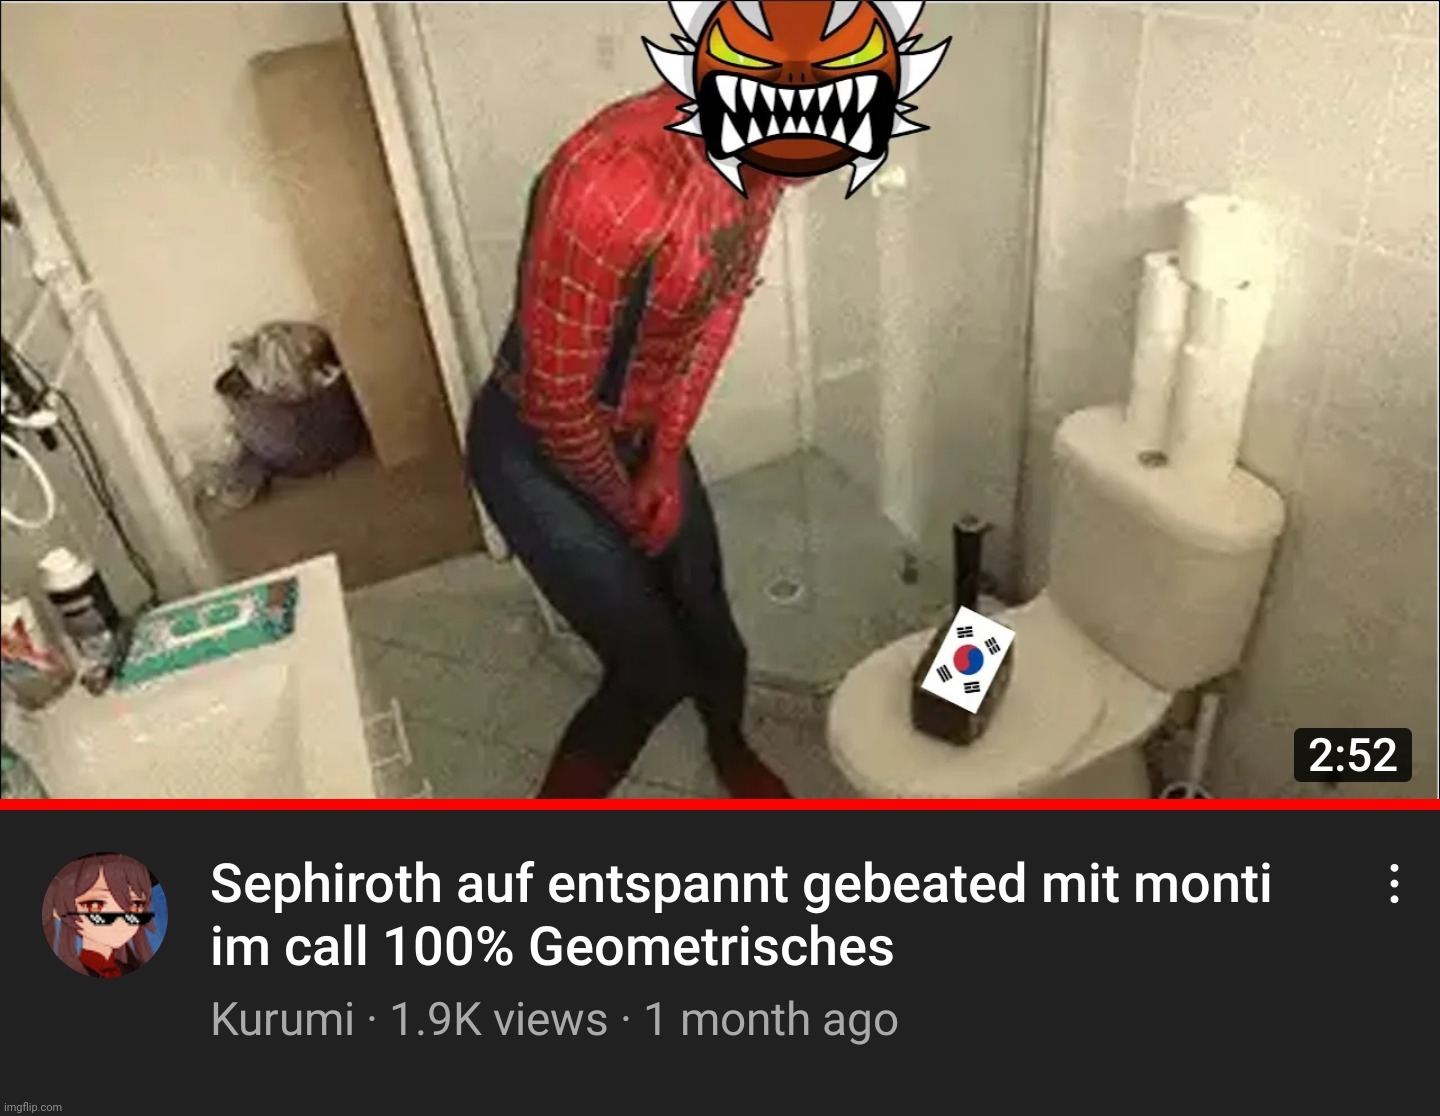 Sephiroth auf entspannt gebeated mit  monti im call 100% Geometrisches | image tagged in memes,german,spiderman,south korea,geometry dash,sephiroth | made w/ Imgflip meme maker